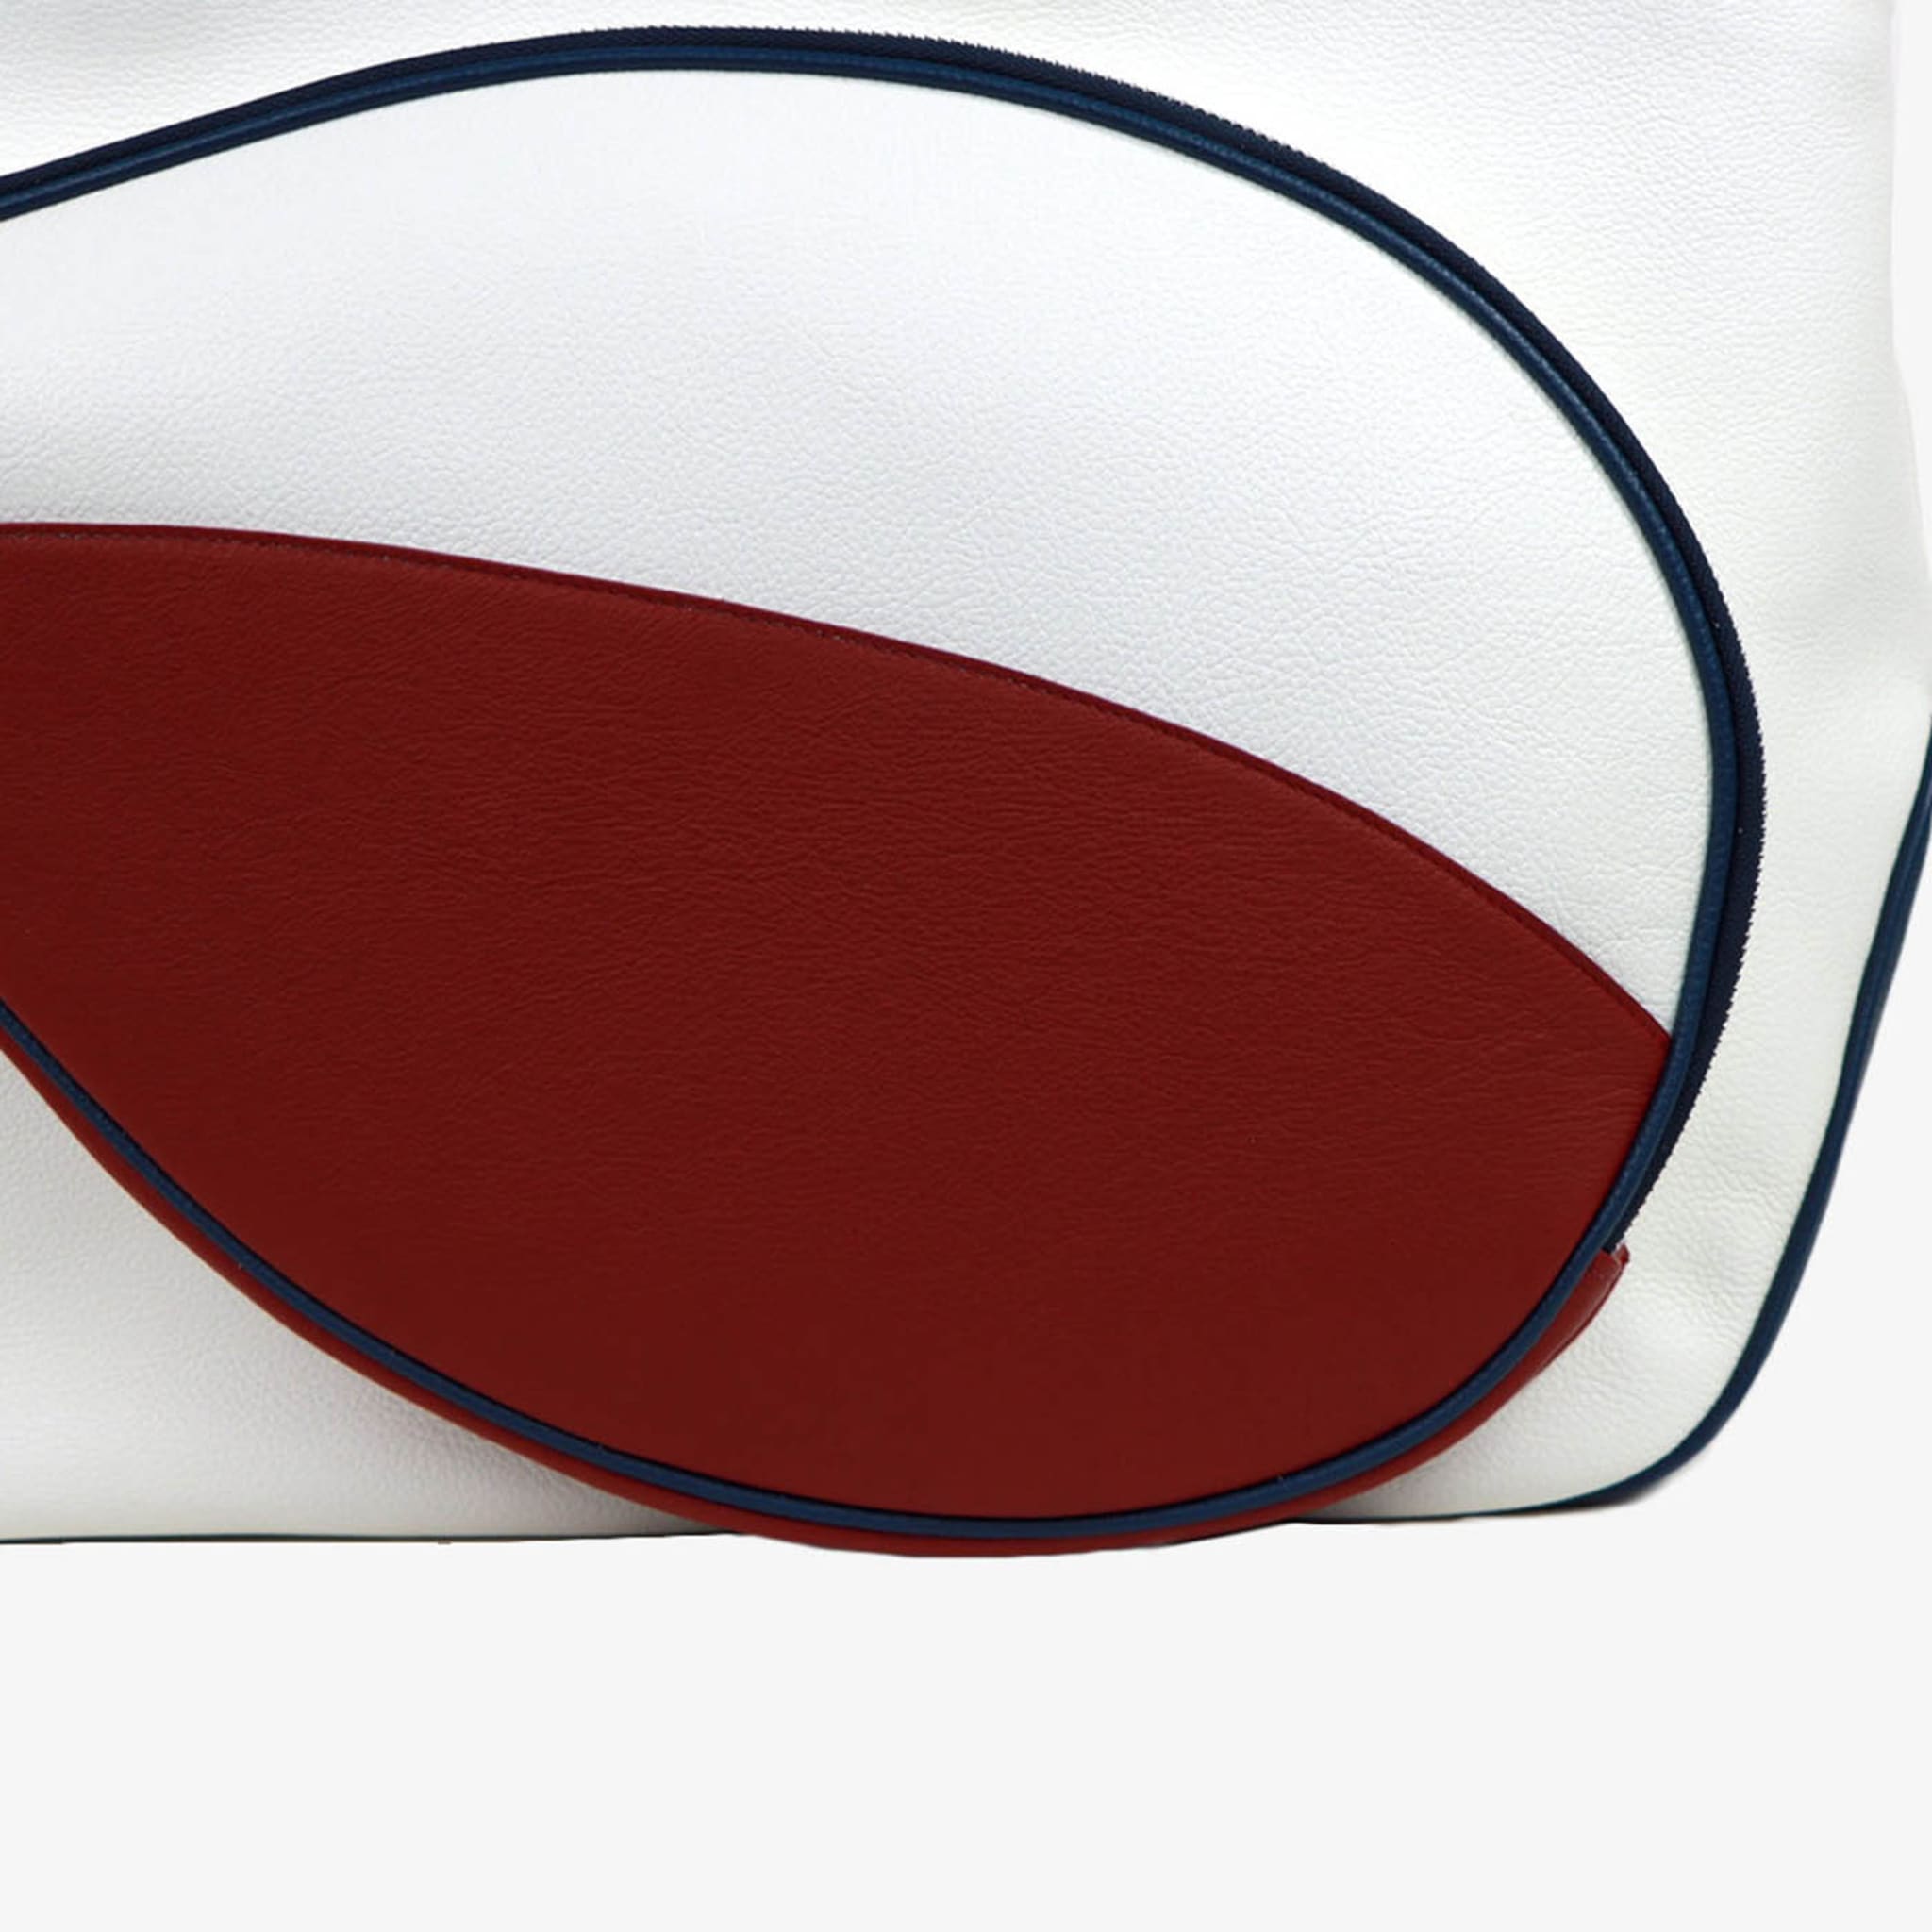 Sport White/Red/Blue Bag with Tennis-Racket-Shaped Pocket - Alternative view 1